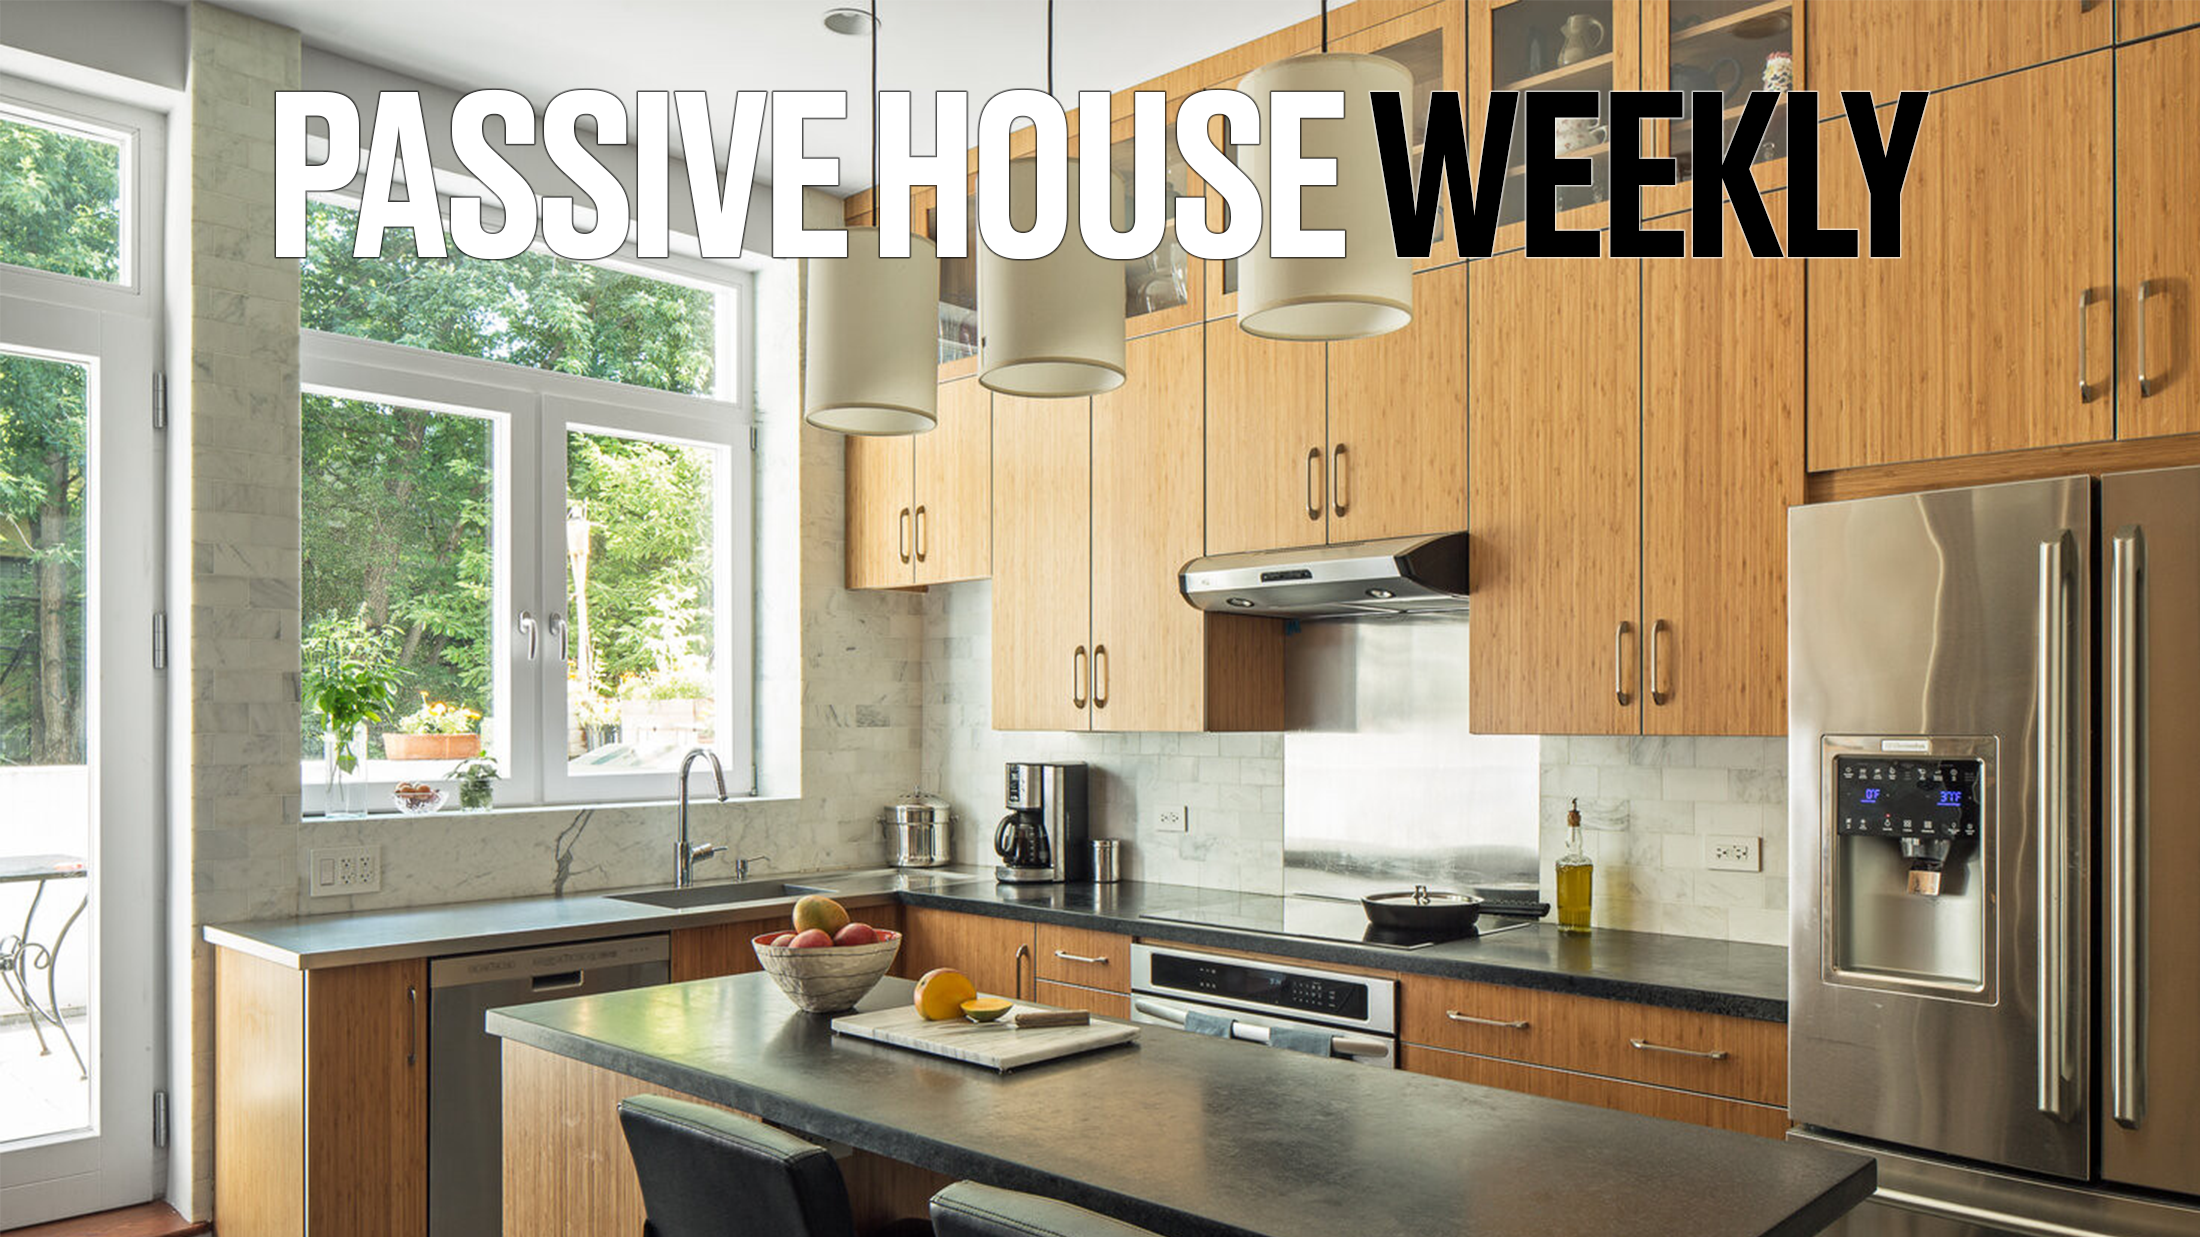 Passive House Weekly: September 12, 2022